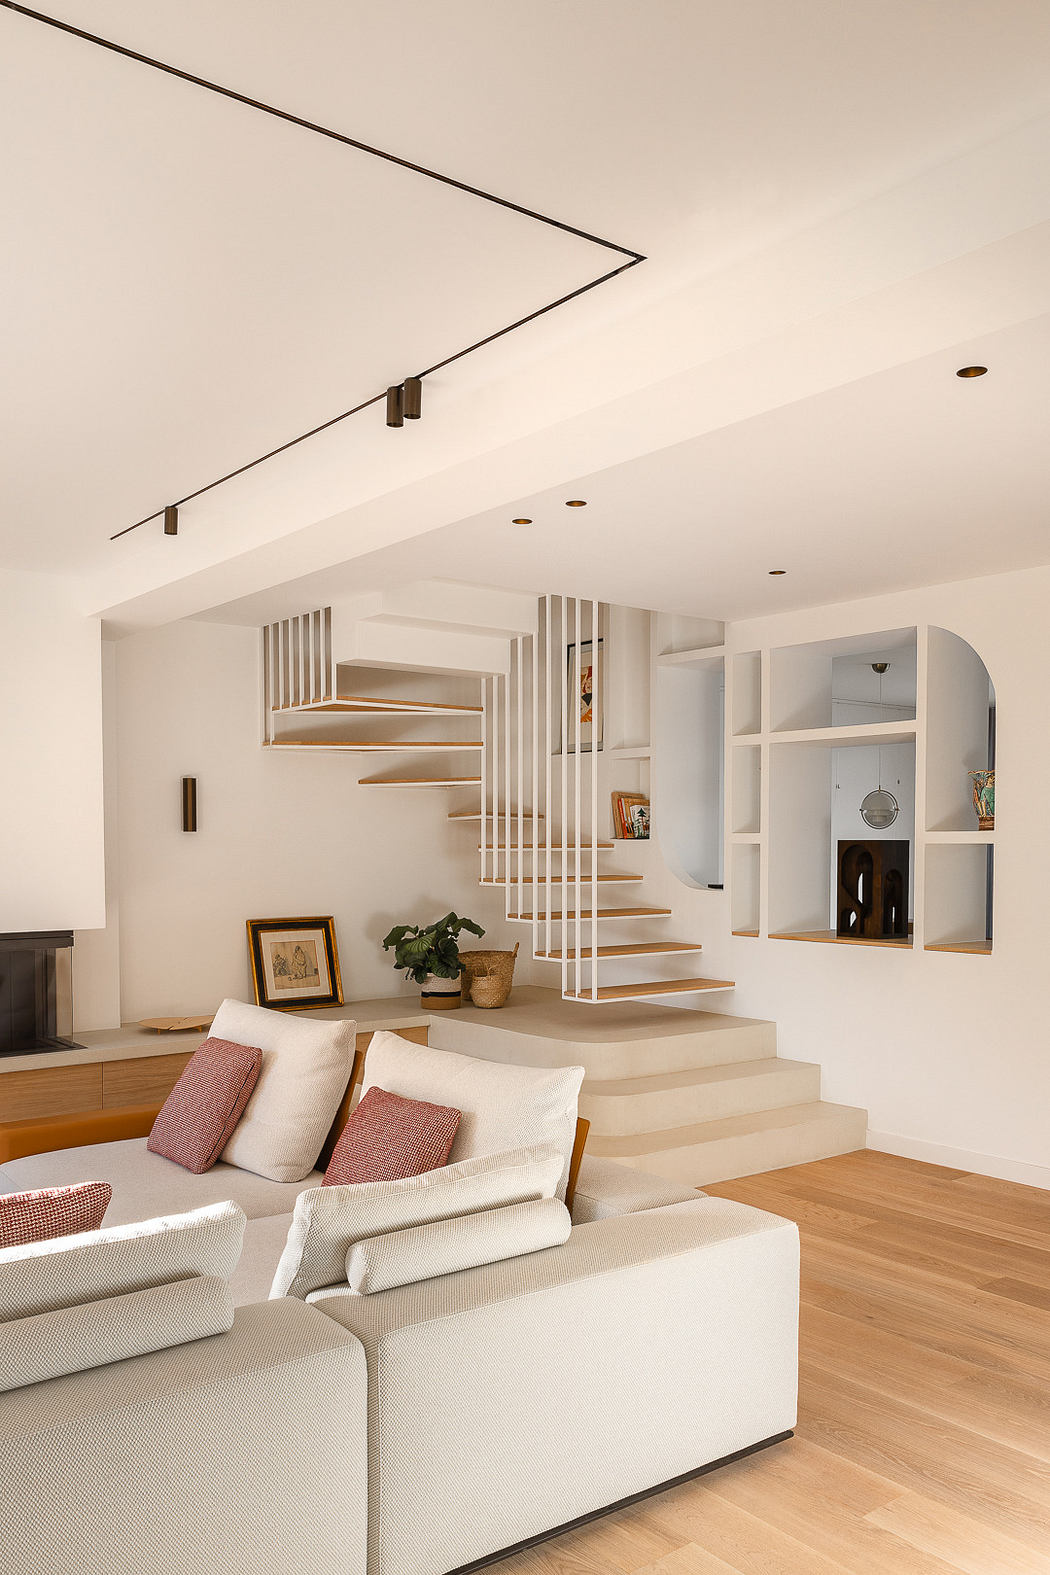 Modern living room with beige sofa and wooden staircase.